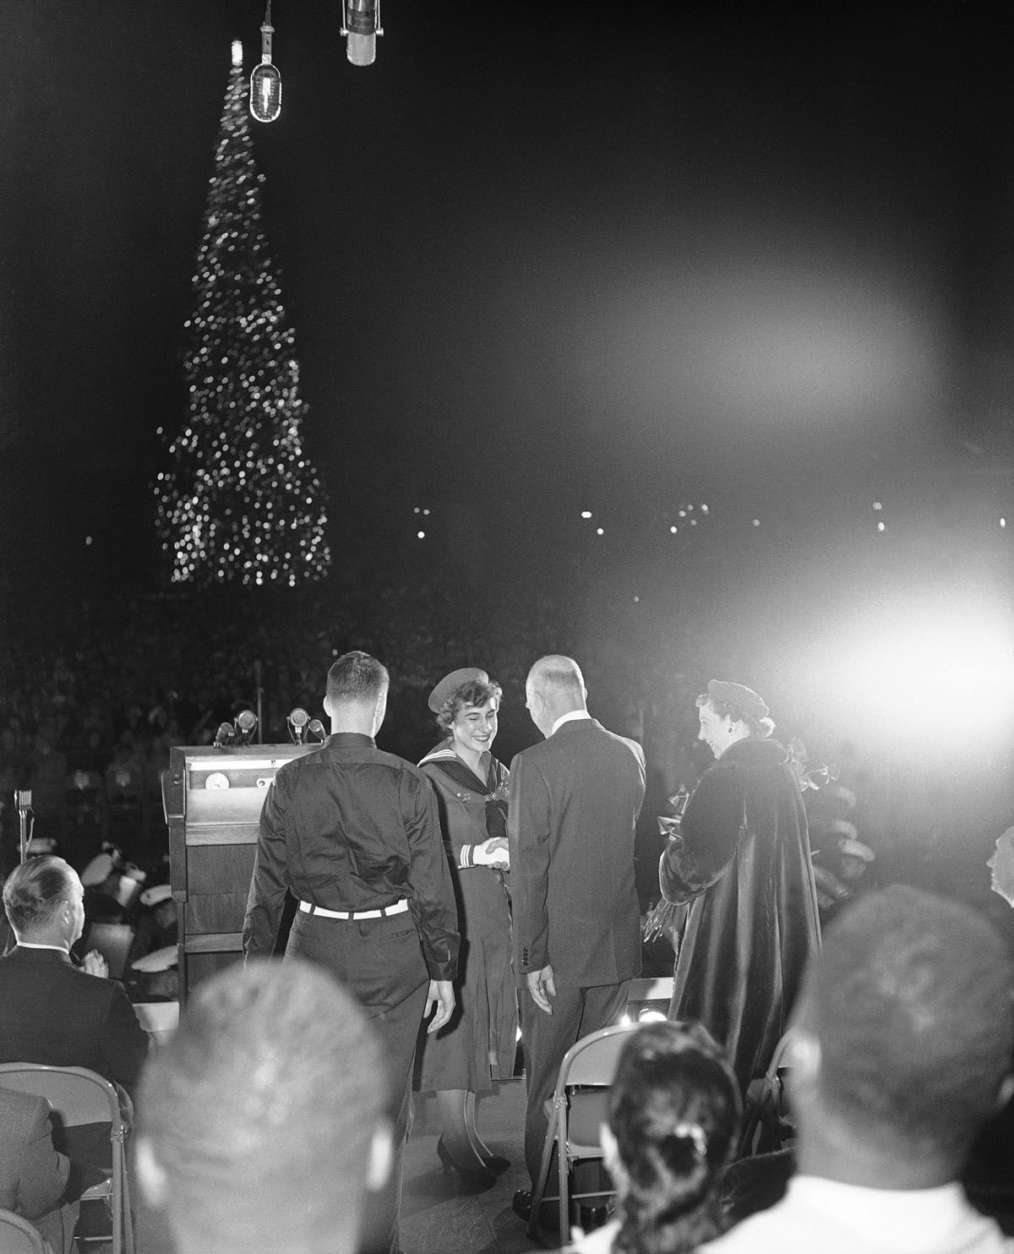 President Dwight Eisenhower shakes hands with Elizabeth Lamphere, 17-year-old girl scout, after lighting the National Christmas Tree in the park behind the White House, Dec. 23, 1958 in Washington.  First lady Mamie Eisenhower is at right.  Robert Elder, 16-year-old Arlington, Va., Boy Scout, is at left.  (AP Photo/Bob Schutz)